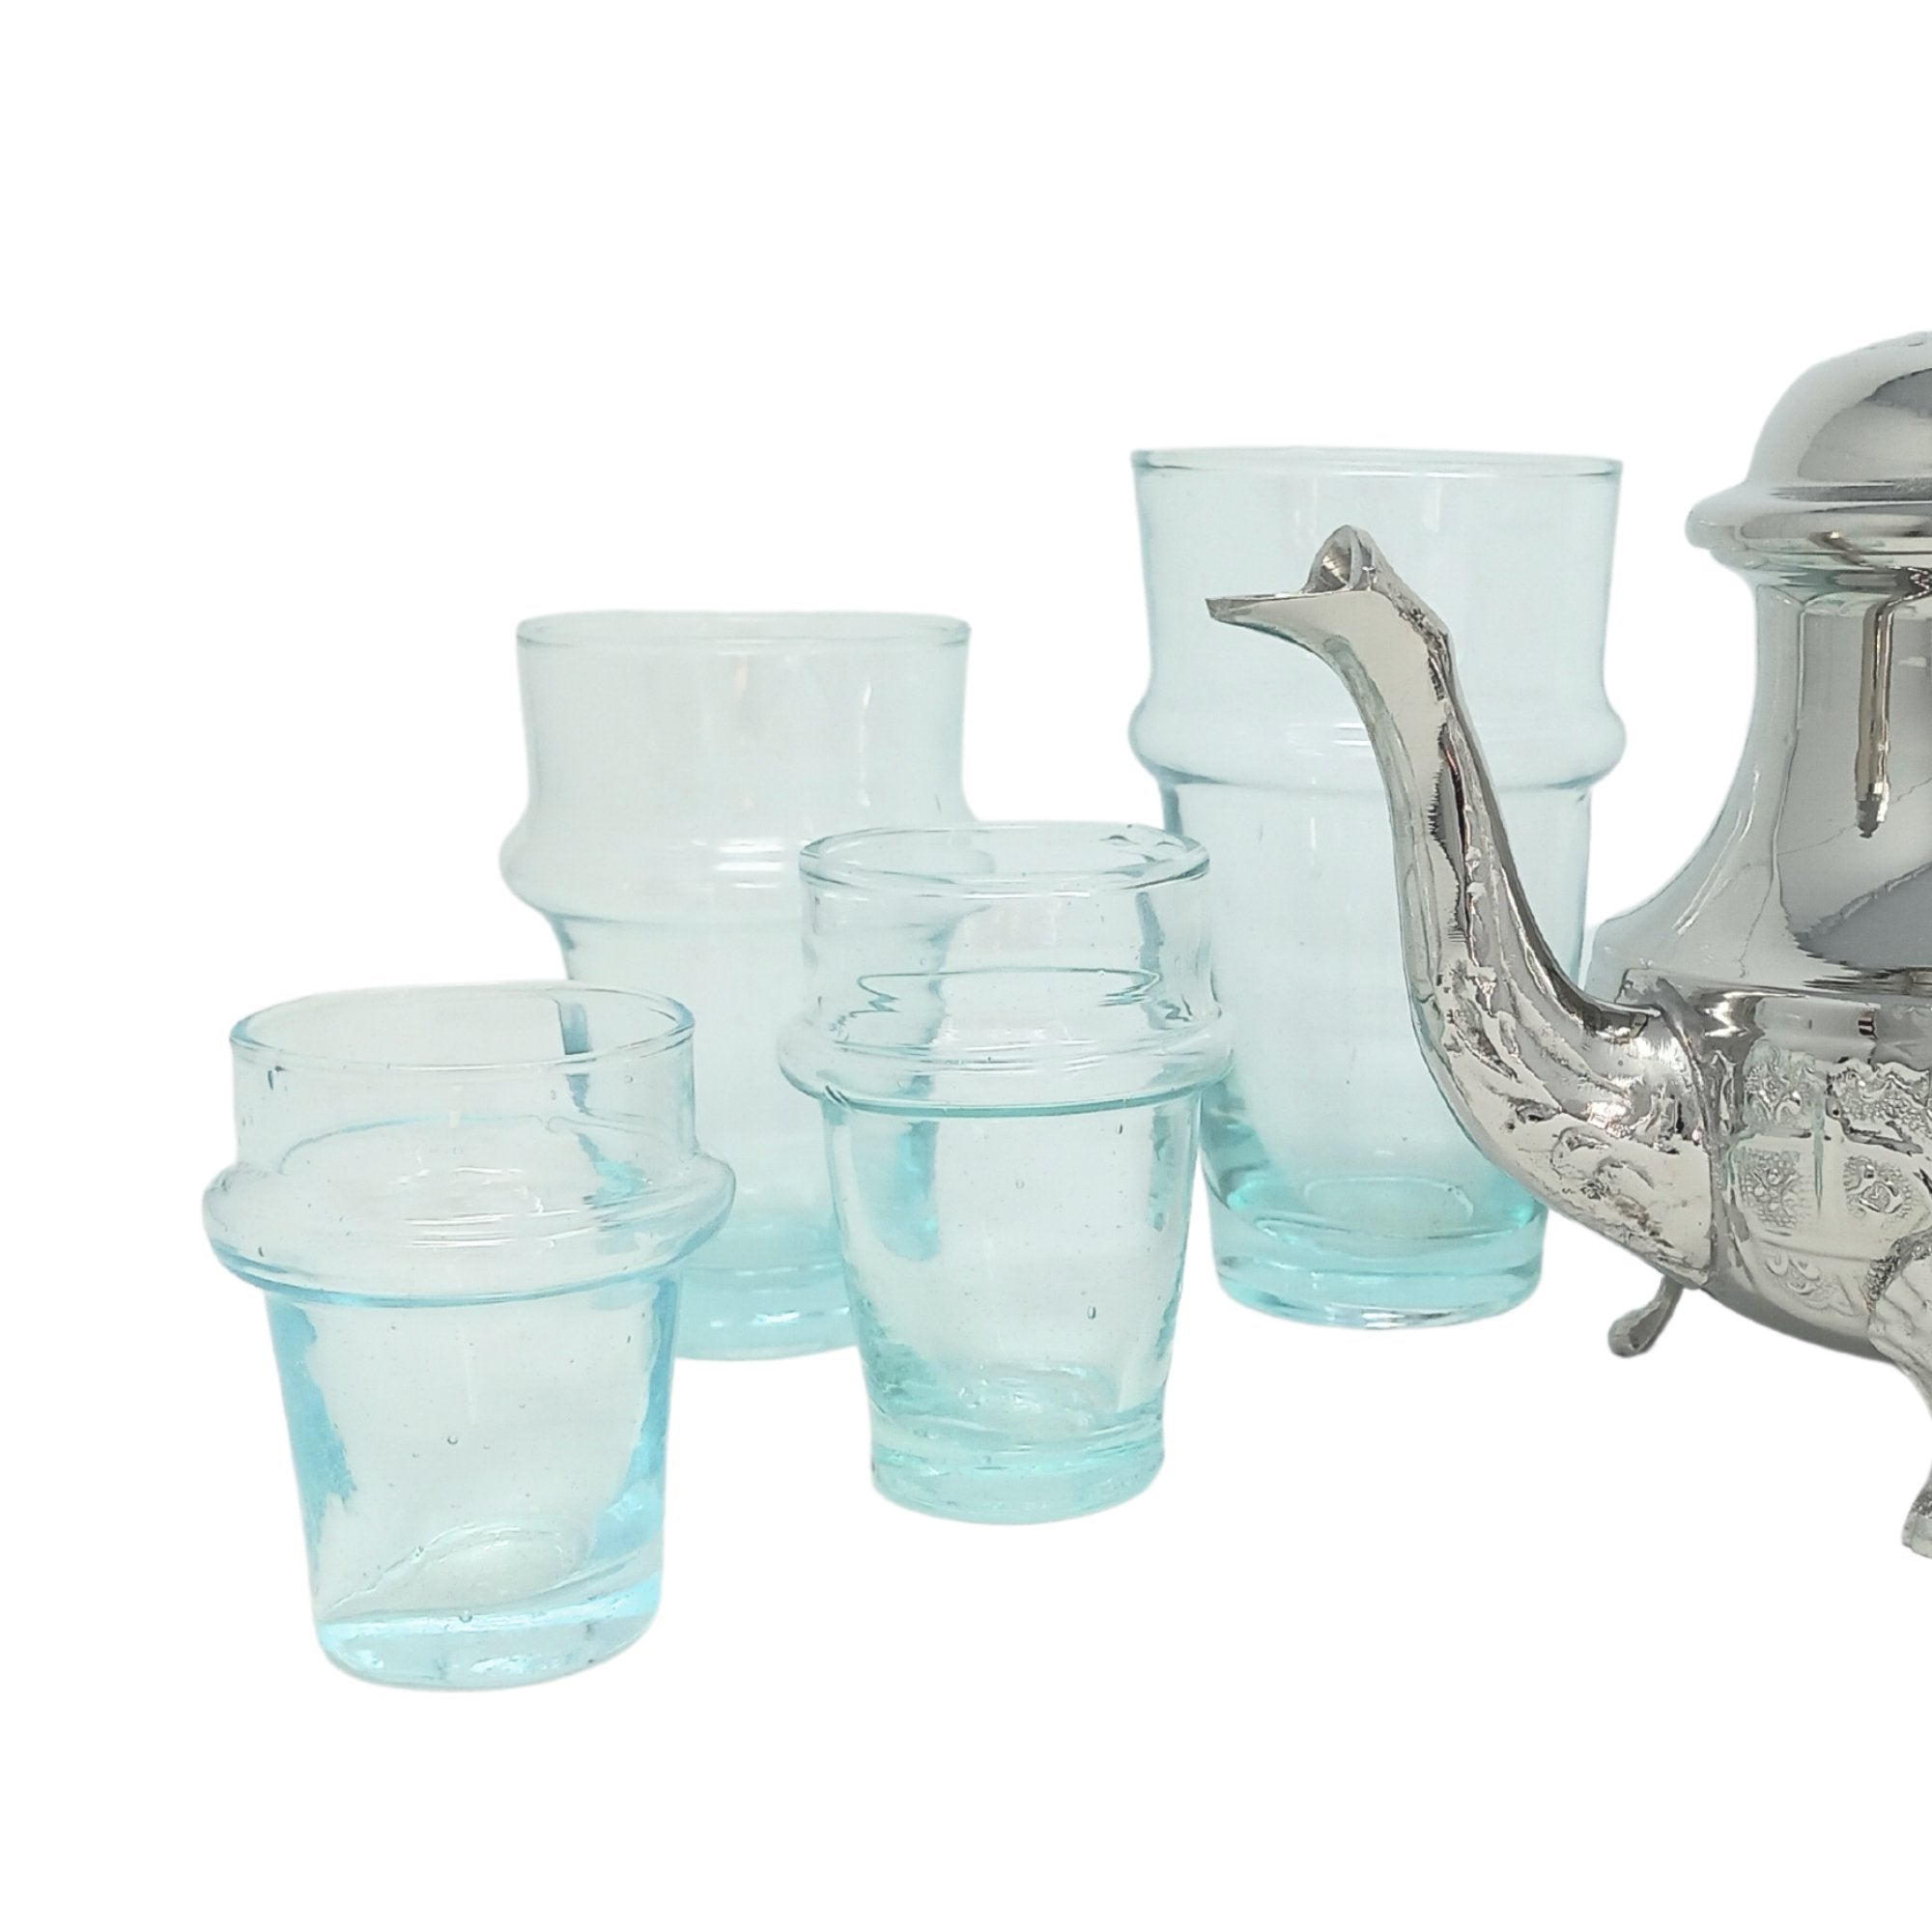 Tea Serving Moroccan Drinking Glasses Recycled Glass - Artisan Stories